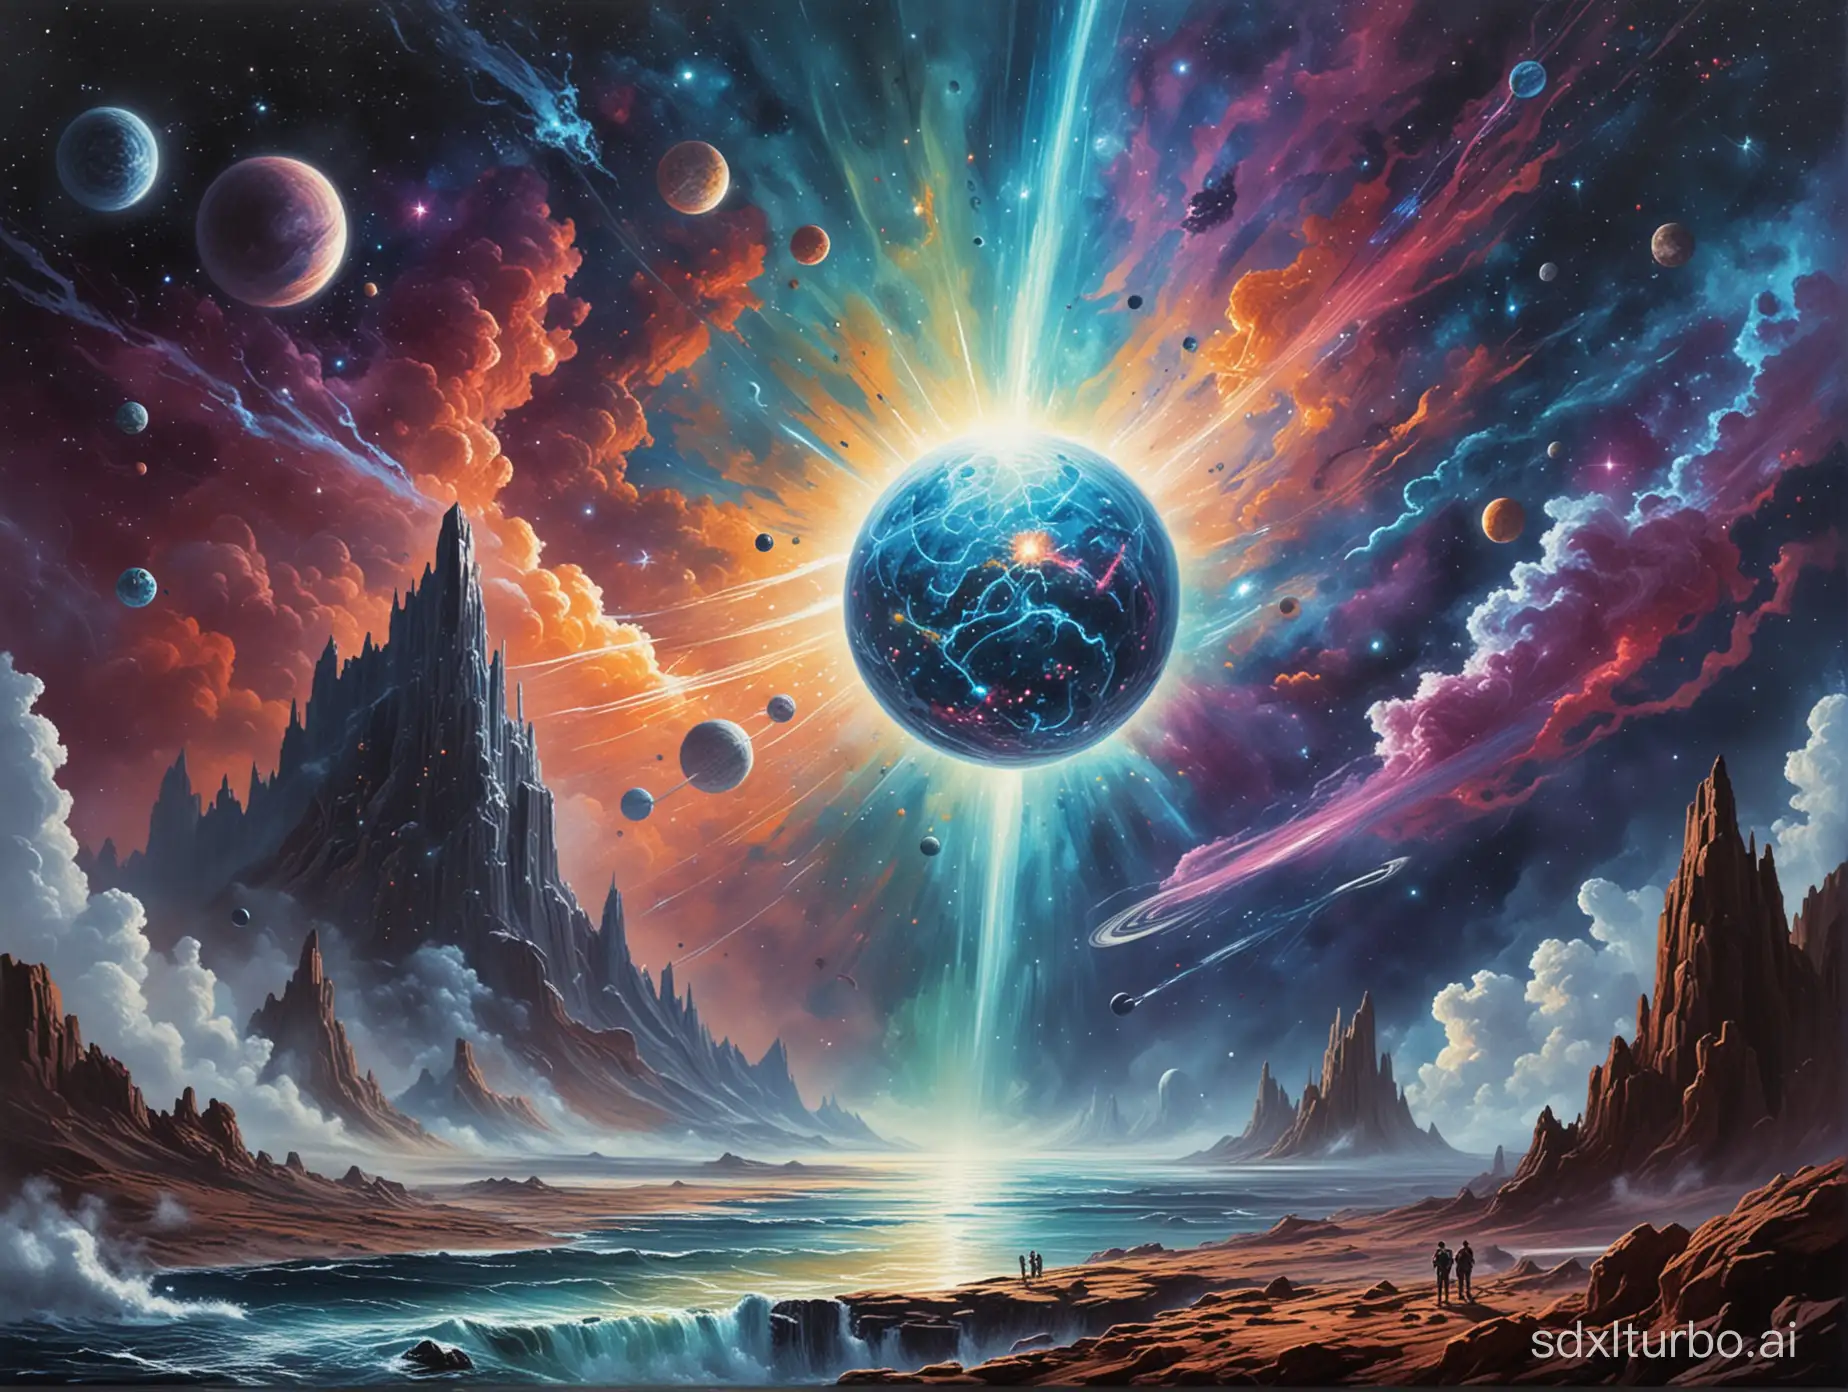 Cosmic science fiction painting